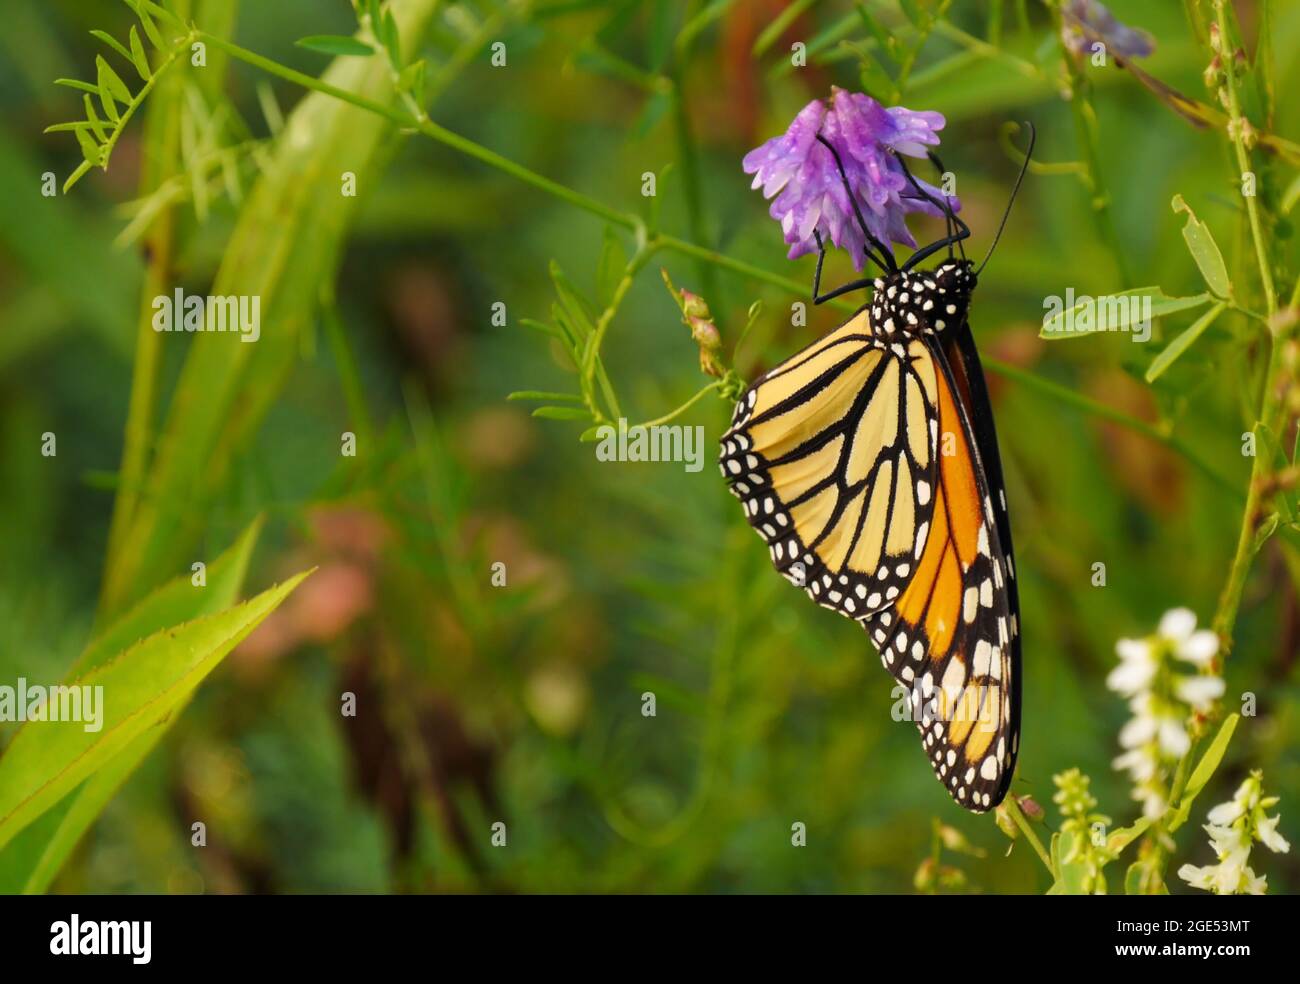 Close-up of a monarch butterfly collecting nectar from the purple flowers on a cow vetch plant in a meadow Stock Photo